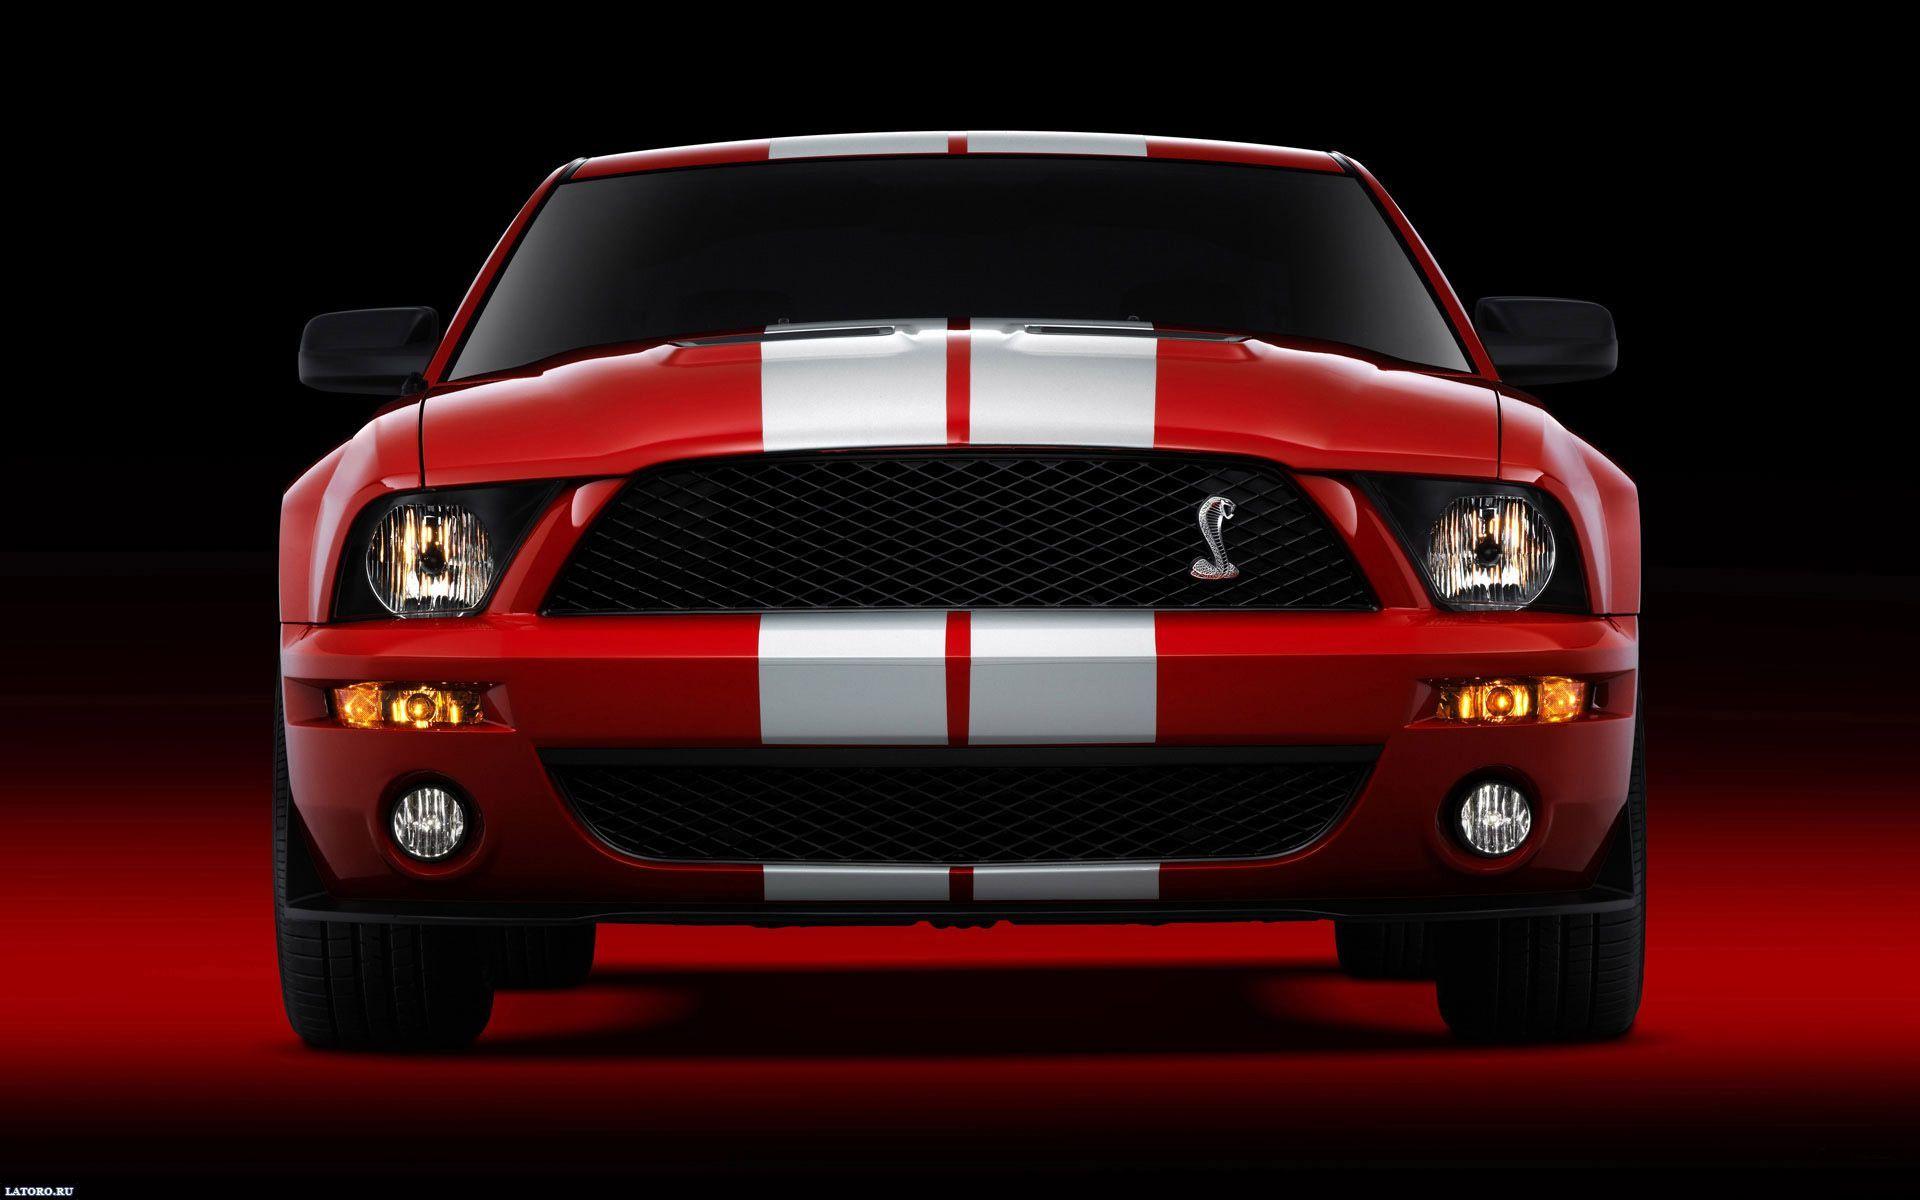 Ford Mustang. Automobiles. Mustang, Ford mustang